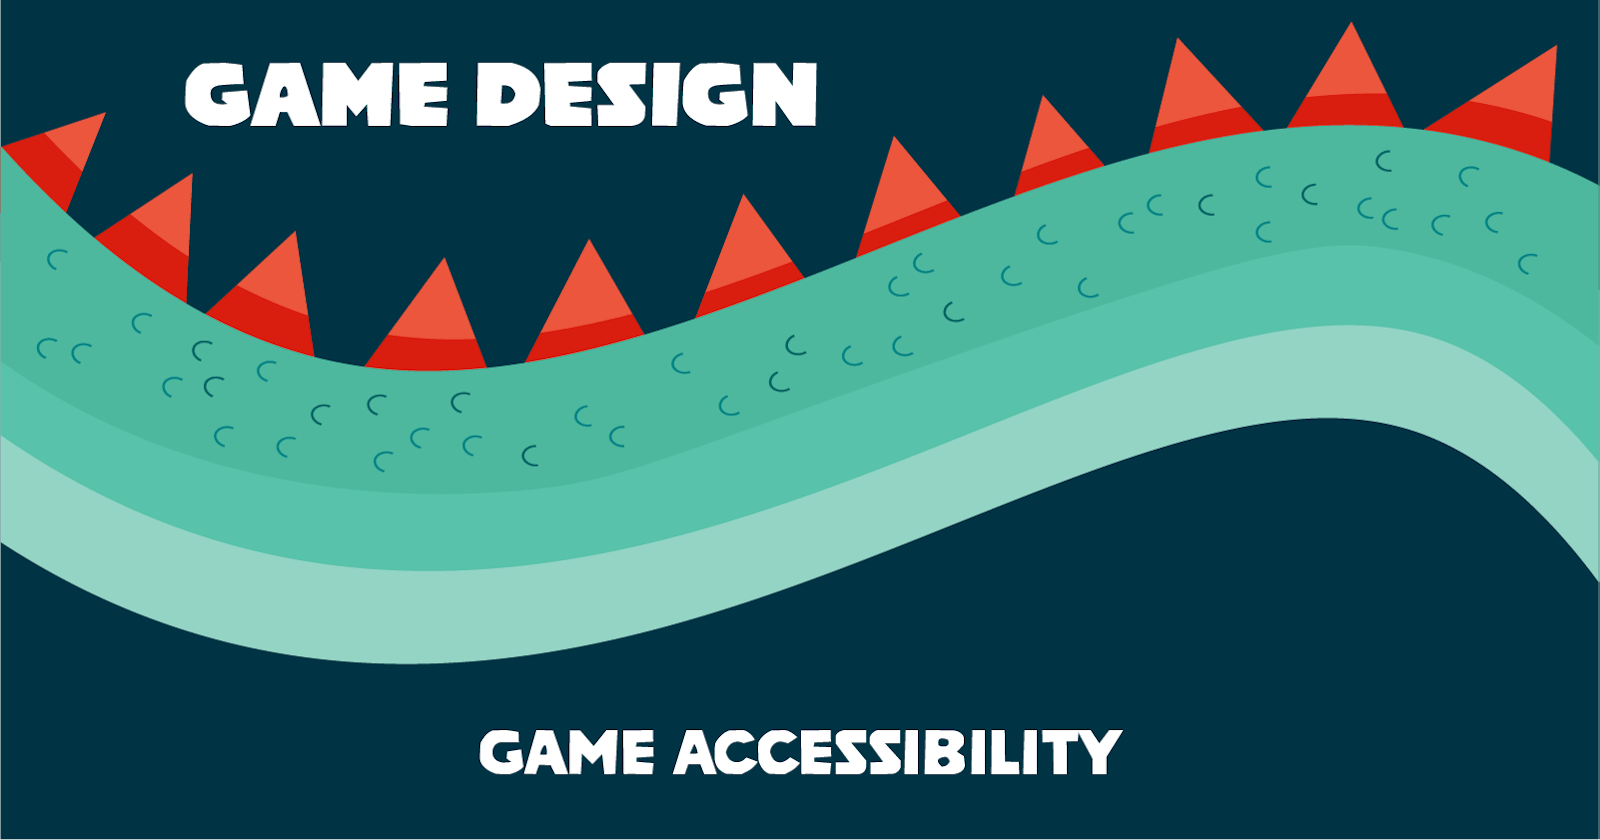 Designing Games for Accessibility